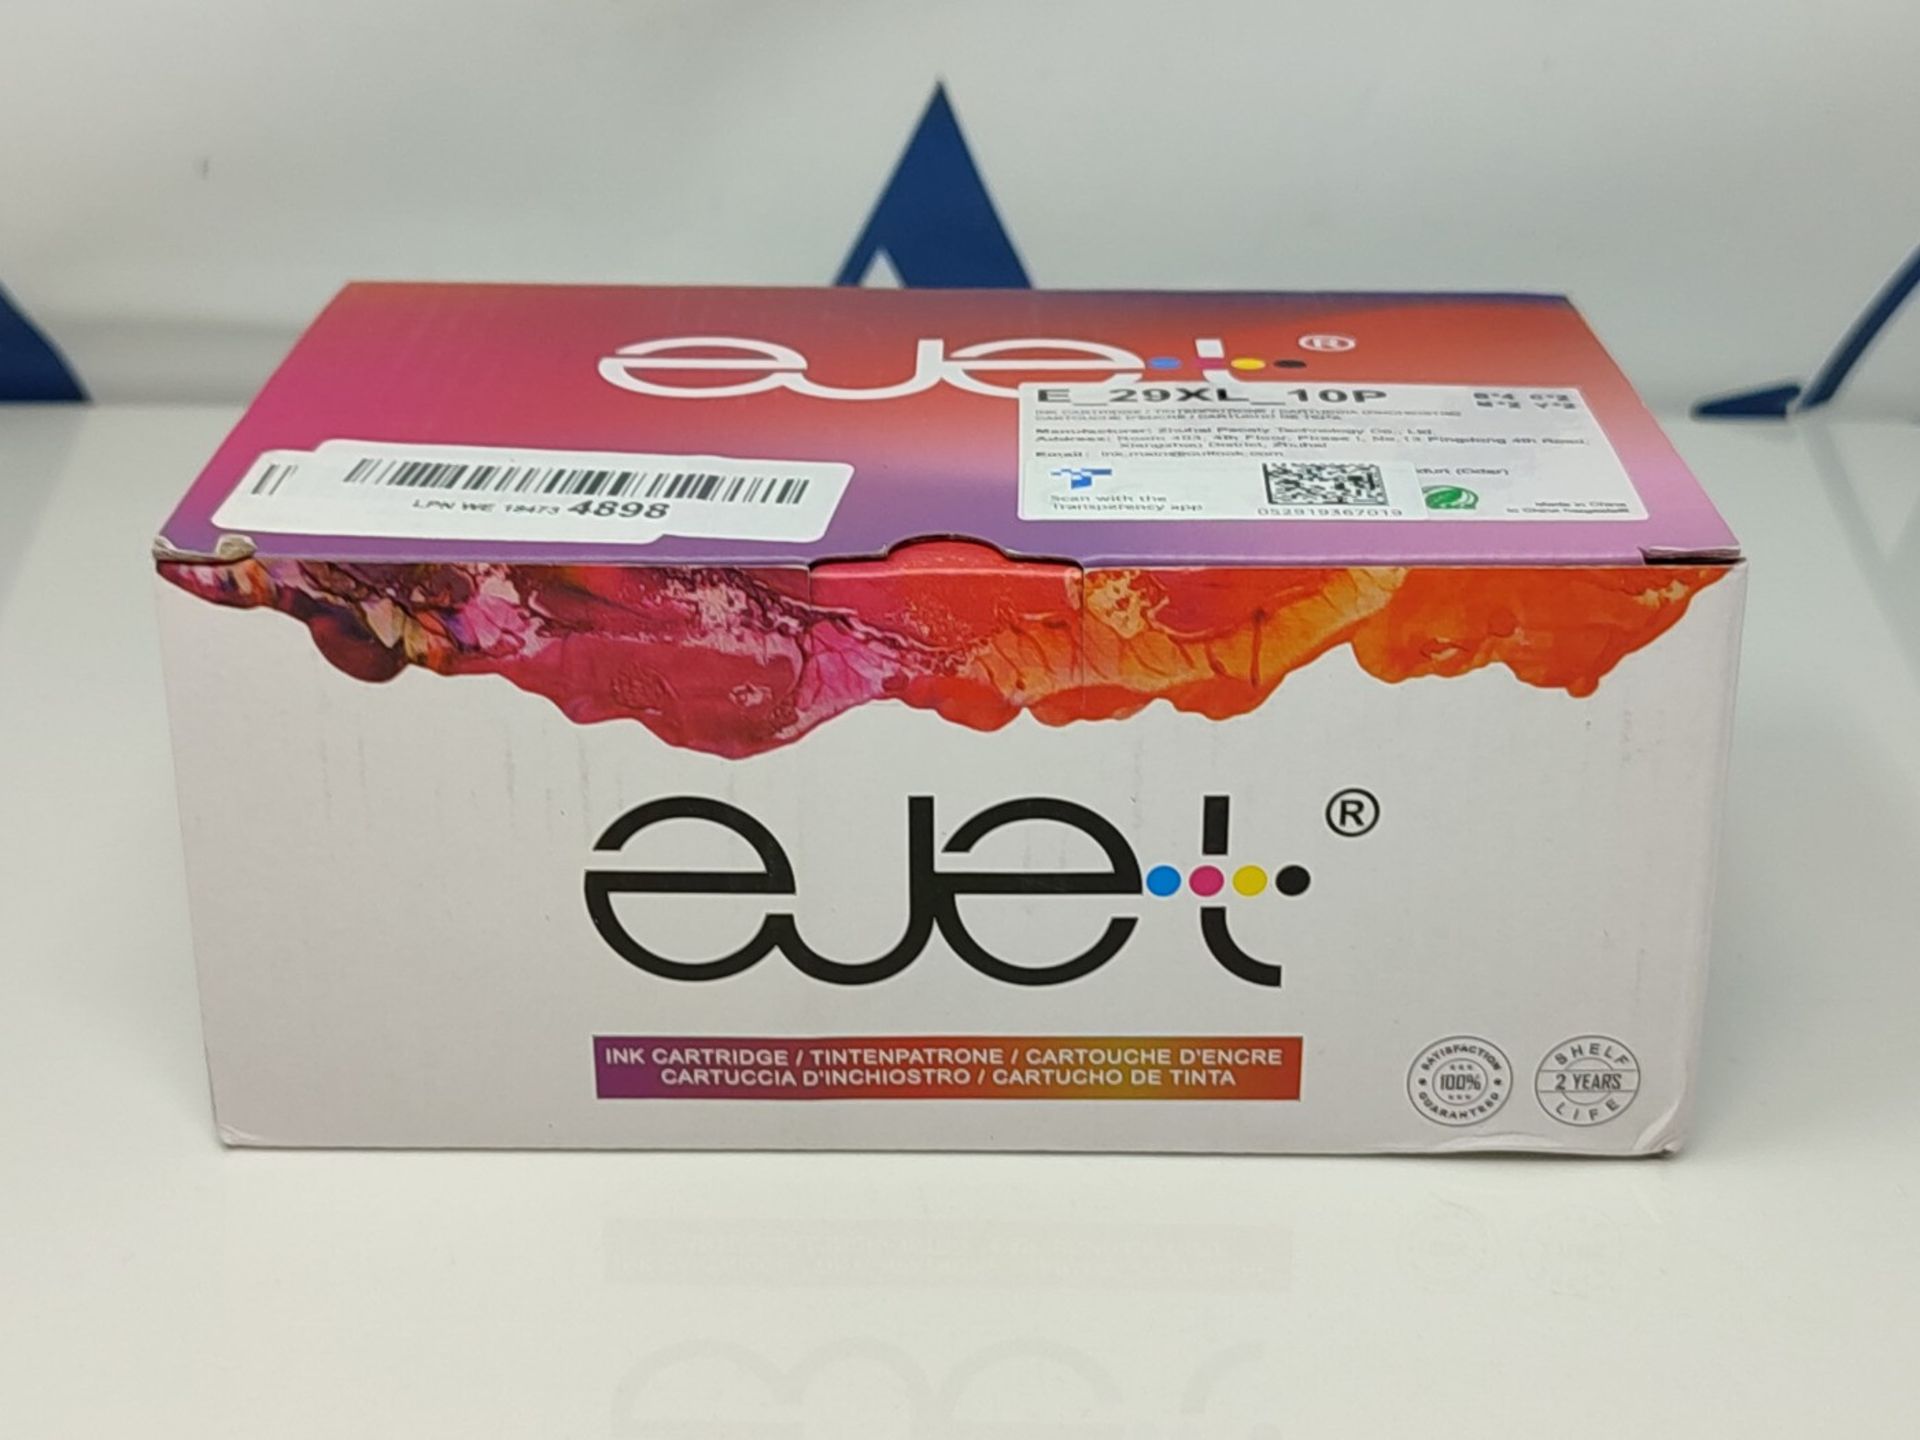 ejet XL High Yield 29XL Ink Cartridge Compatible Replacement for Epson 29 XL for XP-25